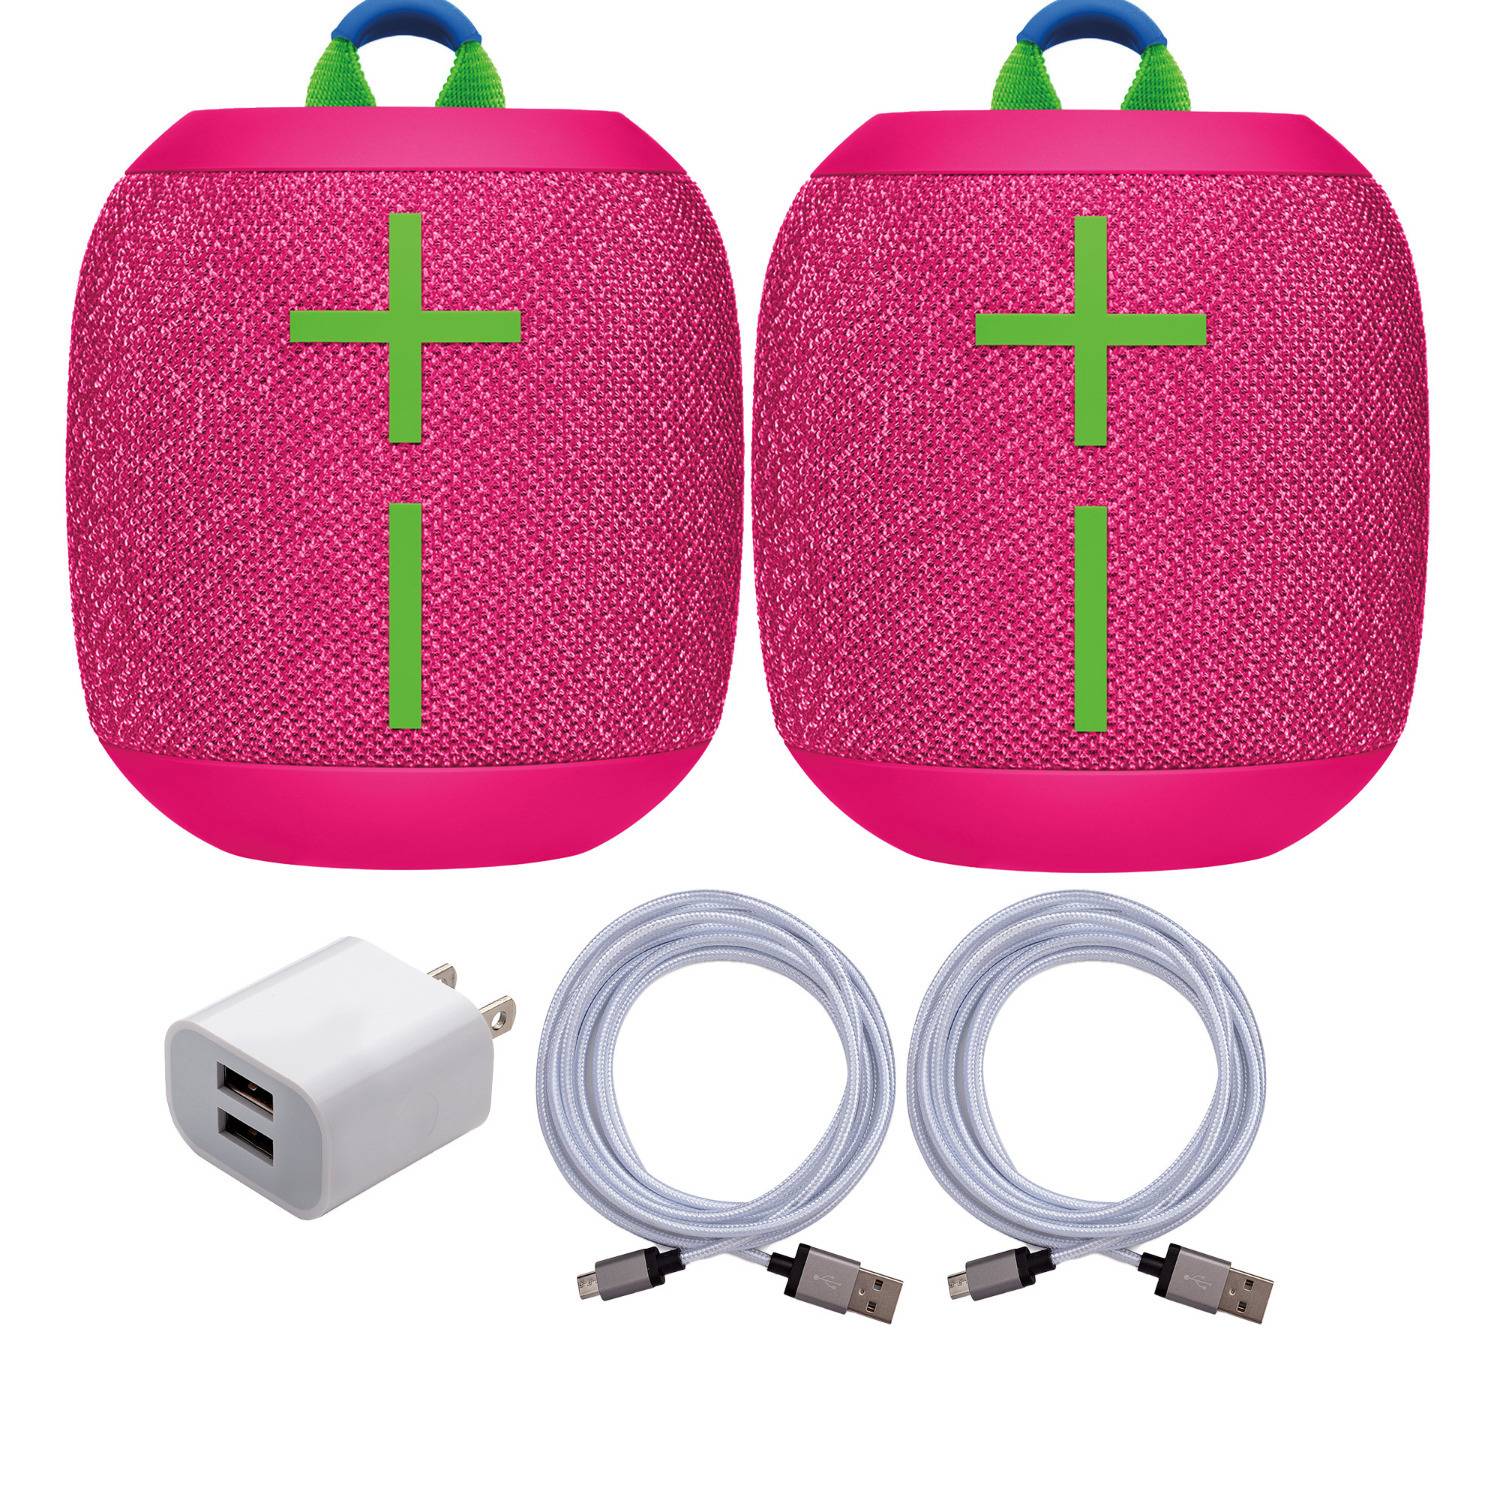 Ultimate Ears WONDERBOOM 3 Bluetooth Speakers (Hyper Pink, 2-Pack) with Cables and AC Adapter